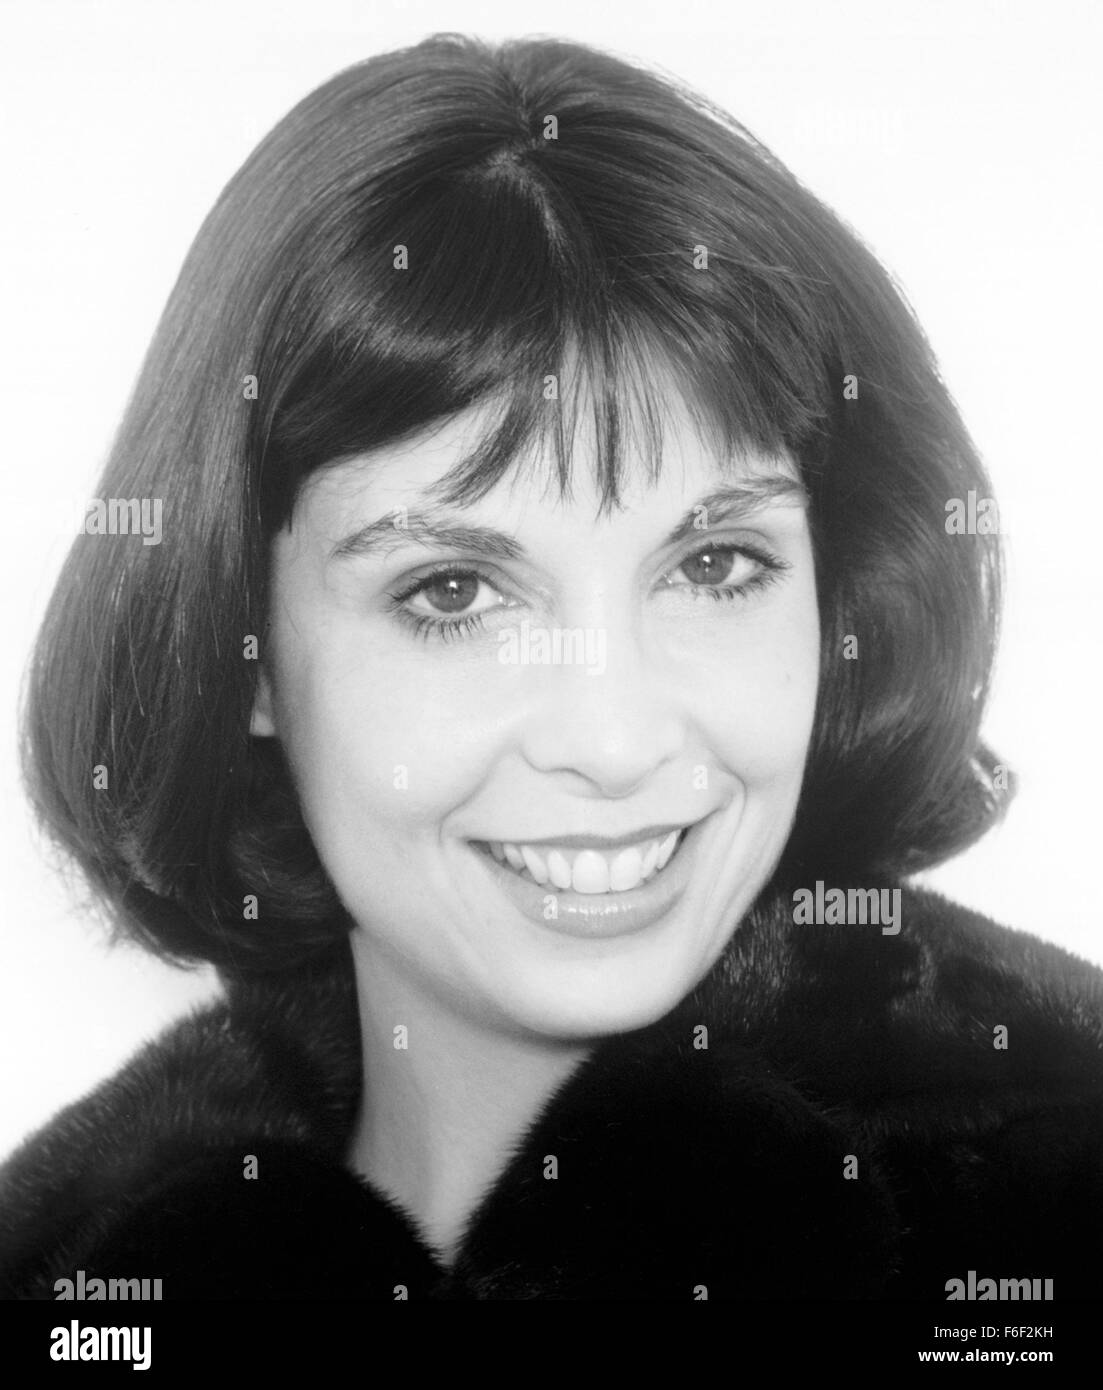 Jun 15, 1979; Philadelphia, PA, USA; TALIA SHIRE as Adrian in the action, sport, drama 'Rocky II' directed by Sylvester Stallone. Stock Photo